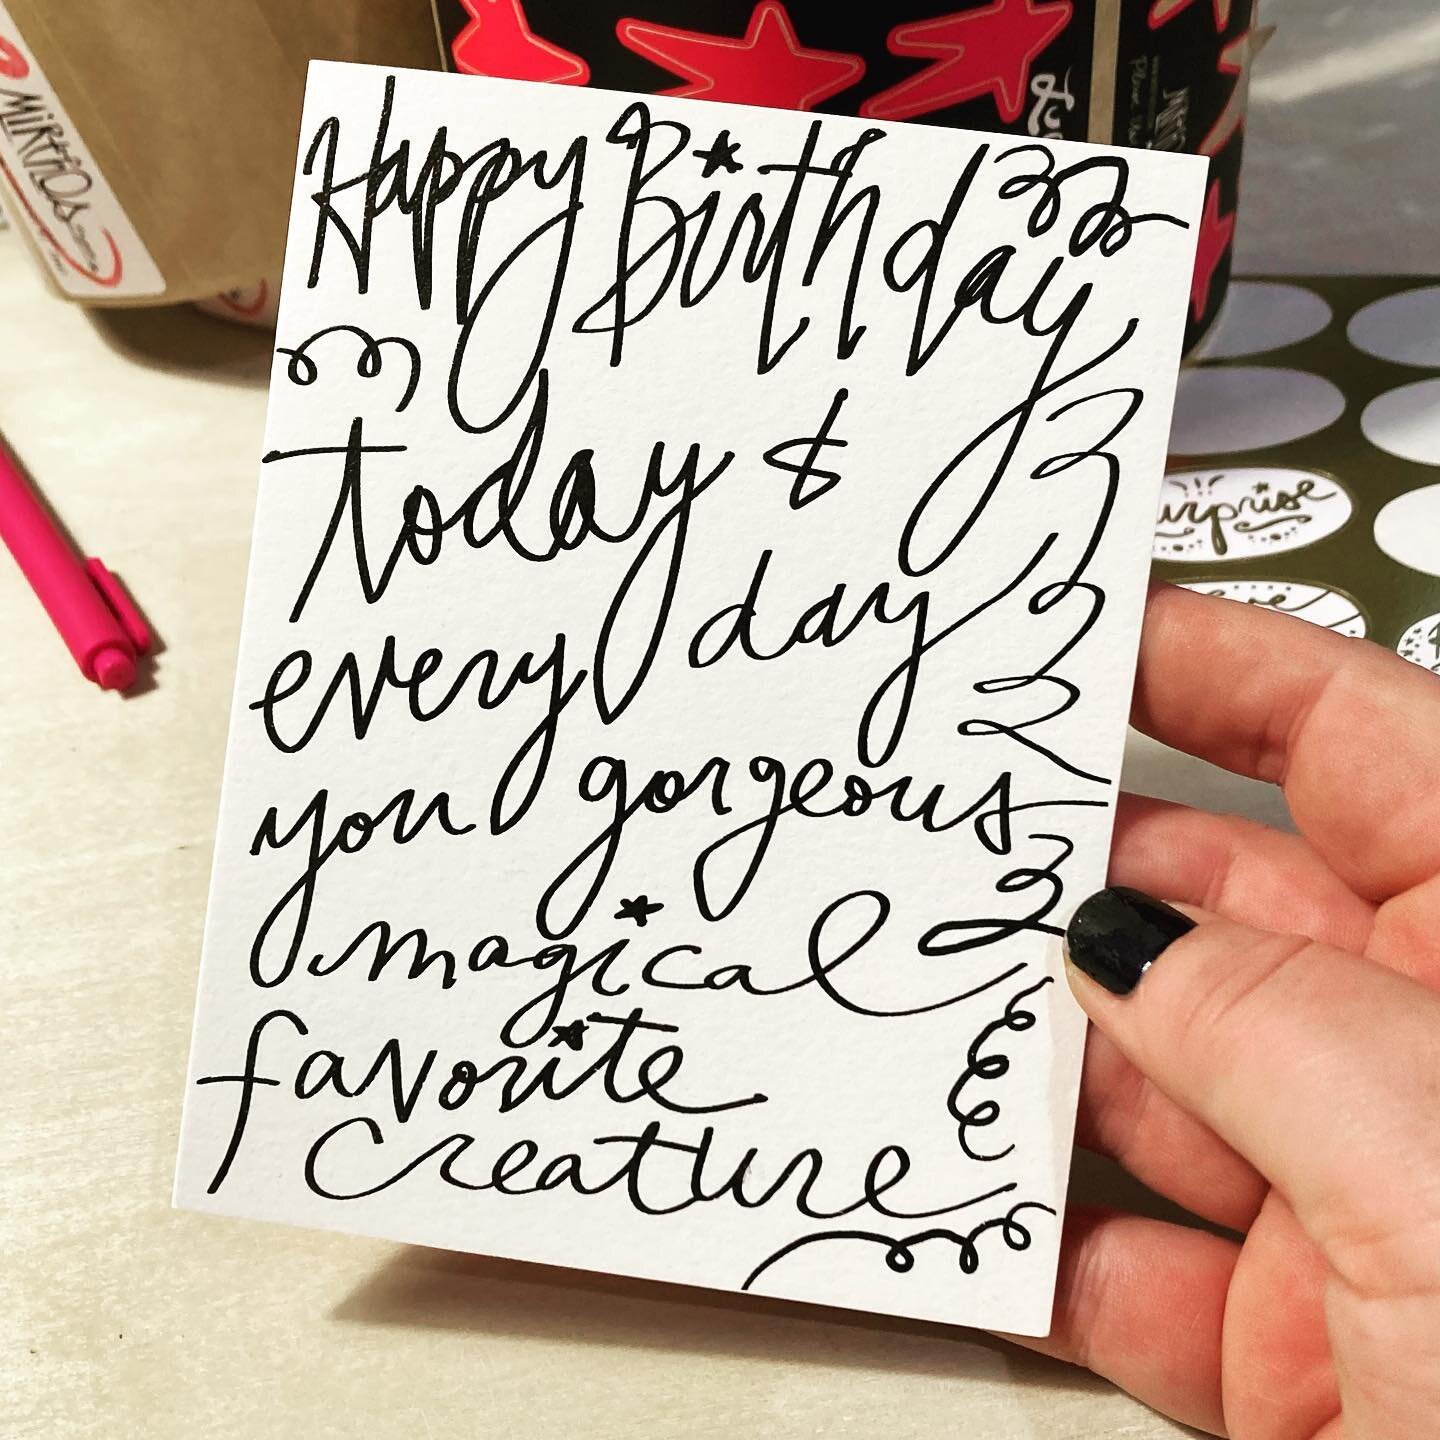 This gorgeous top selling birthday card has a story! 

First of all, I&rsquo;ve had this made in tactile thermography - raised print like some &ldquo;engraved&rdquo; invitations have - but wildly wonky like Mirthos does! Read on&hellip;.

So in May 2